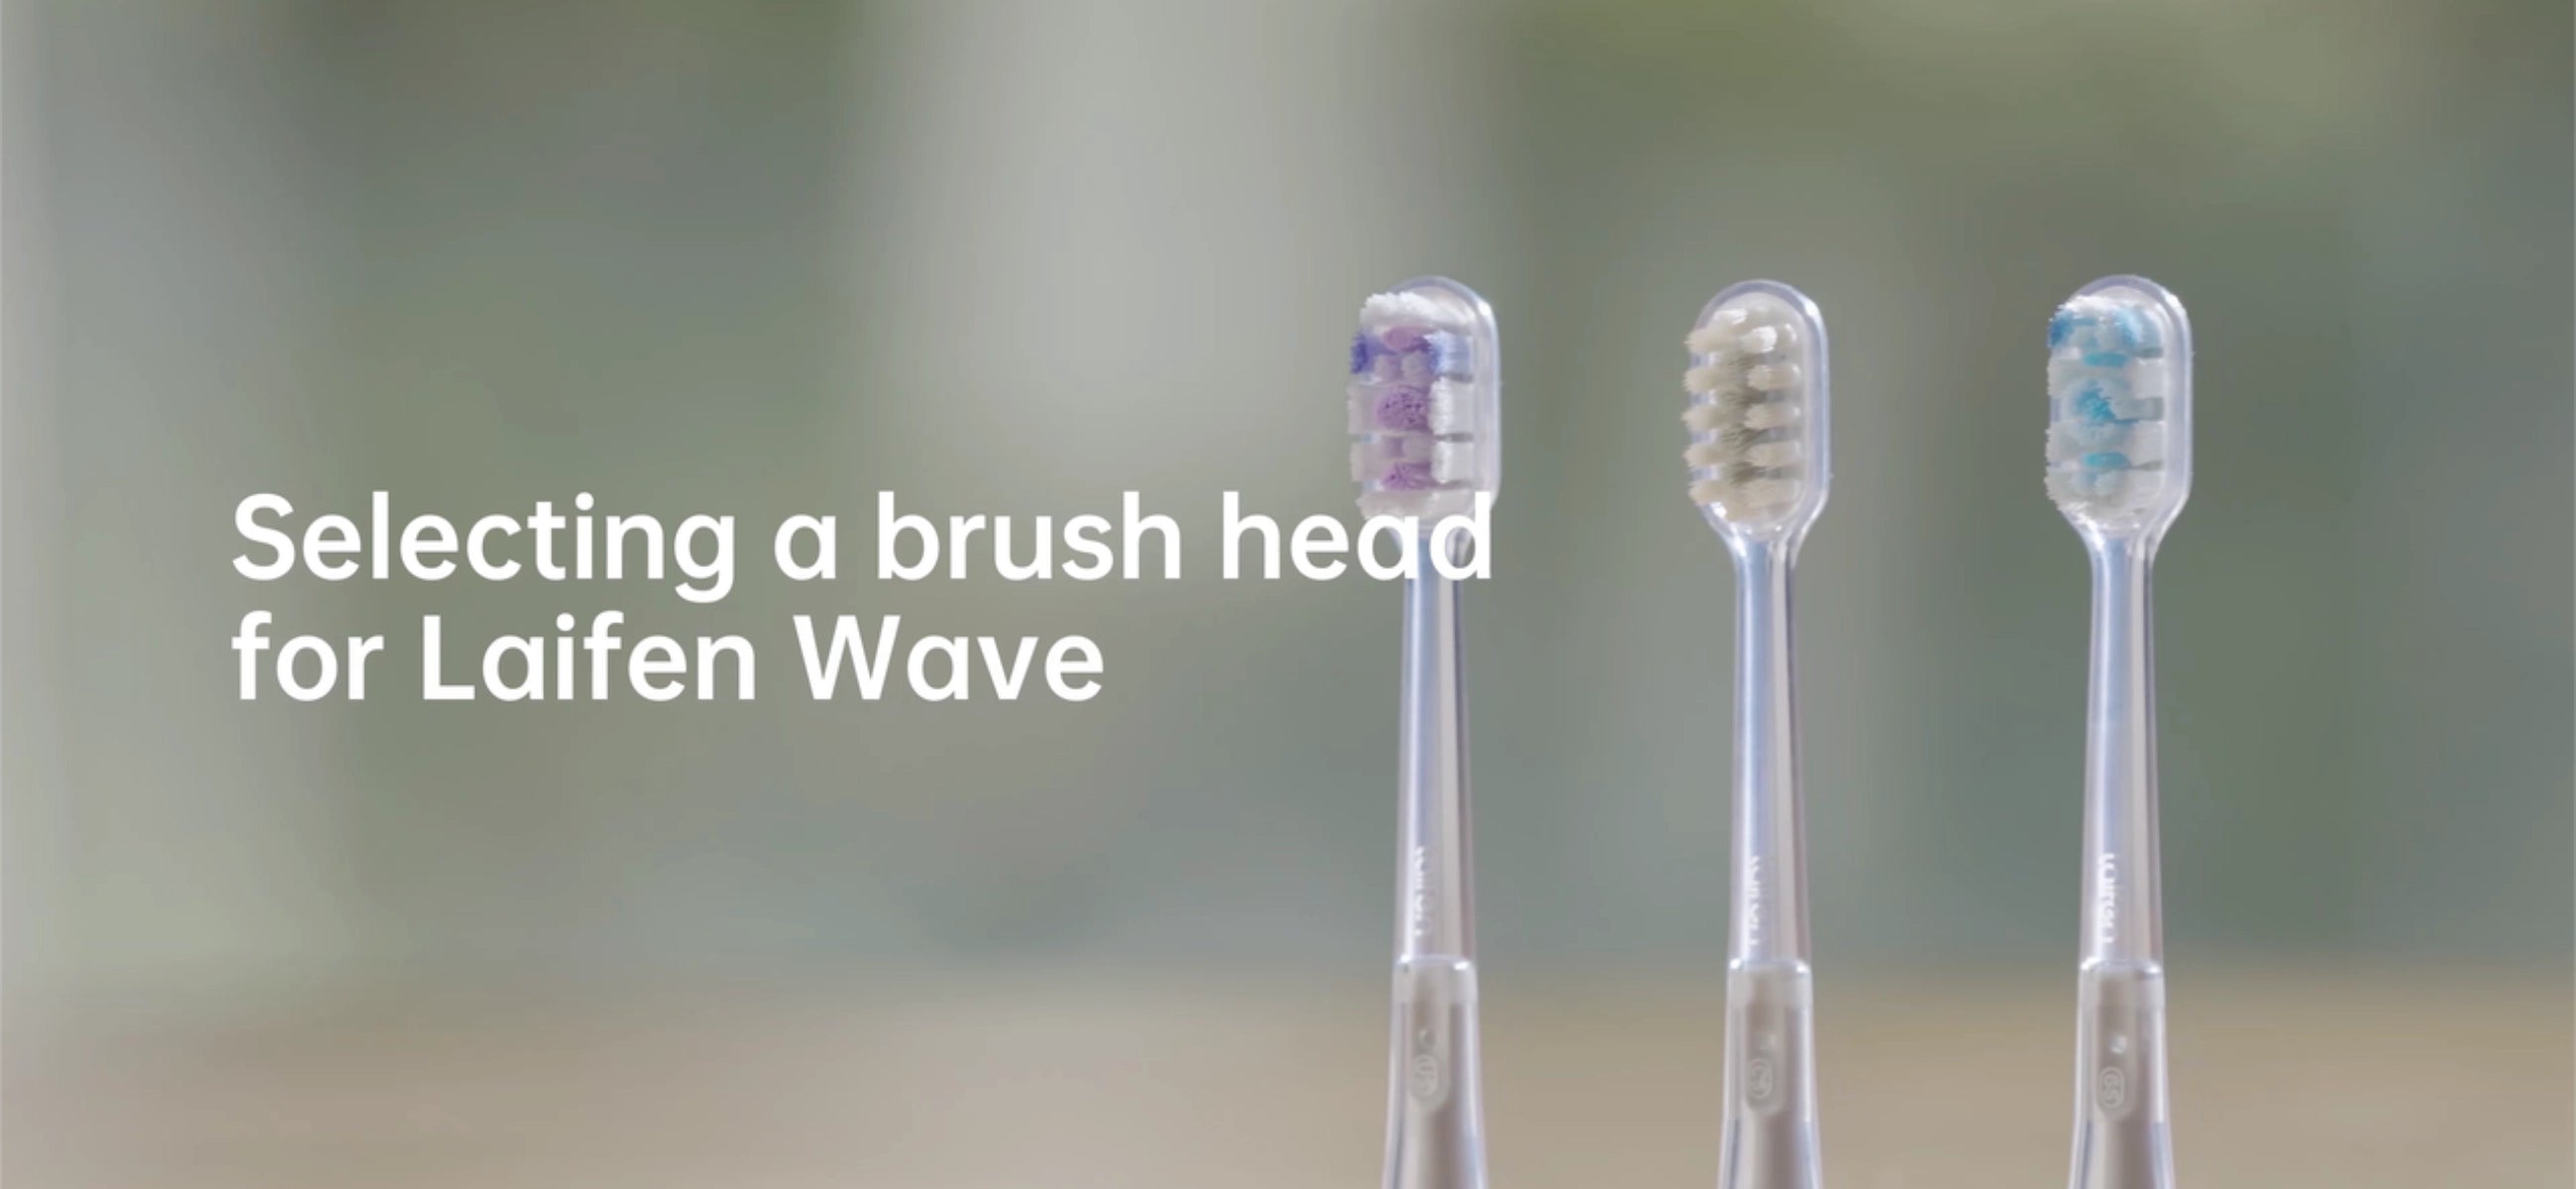 Laifen Wave brush head guide: Choosing the right one for you